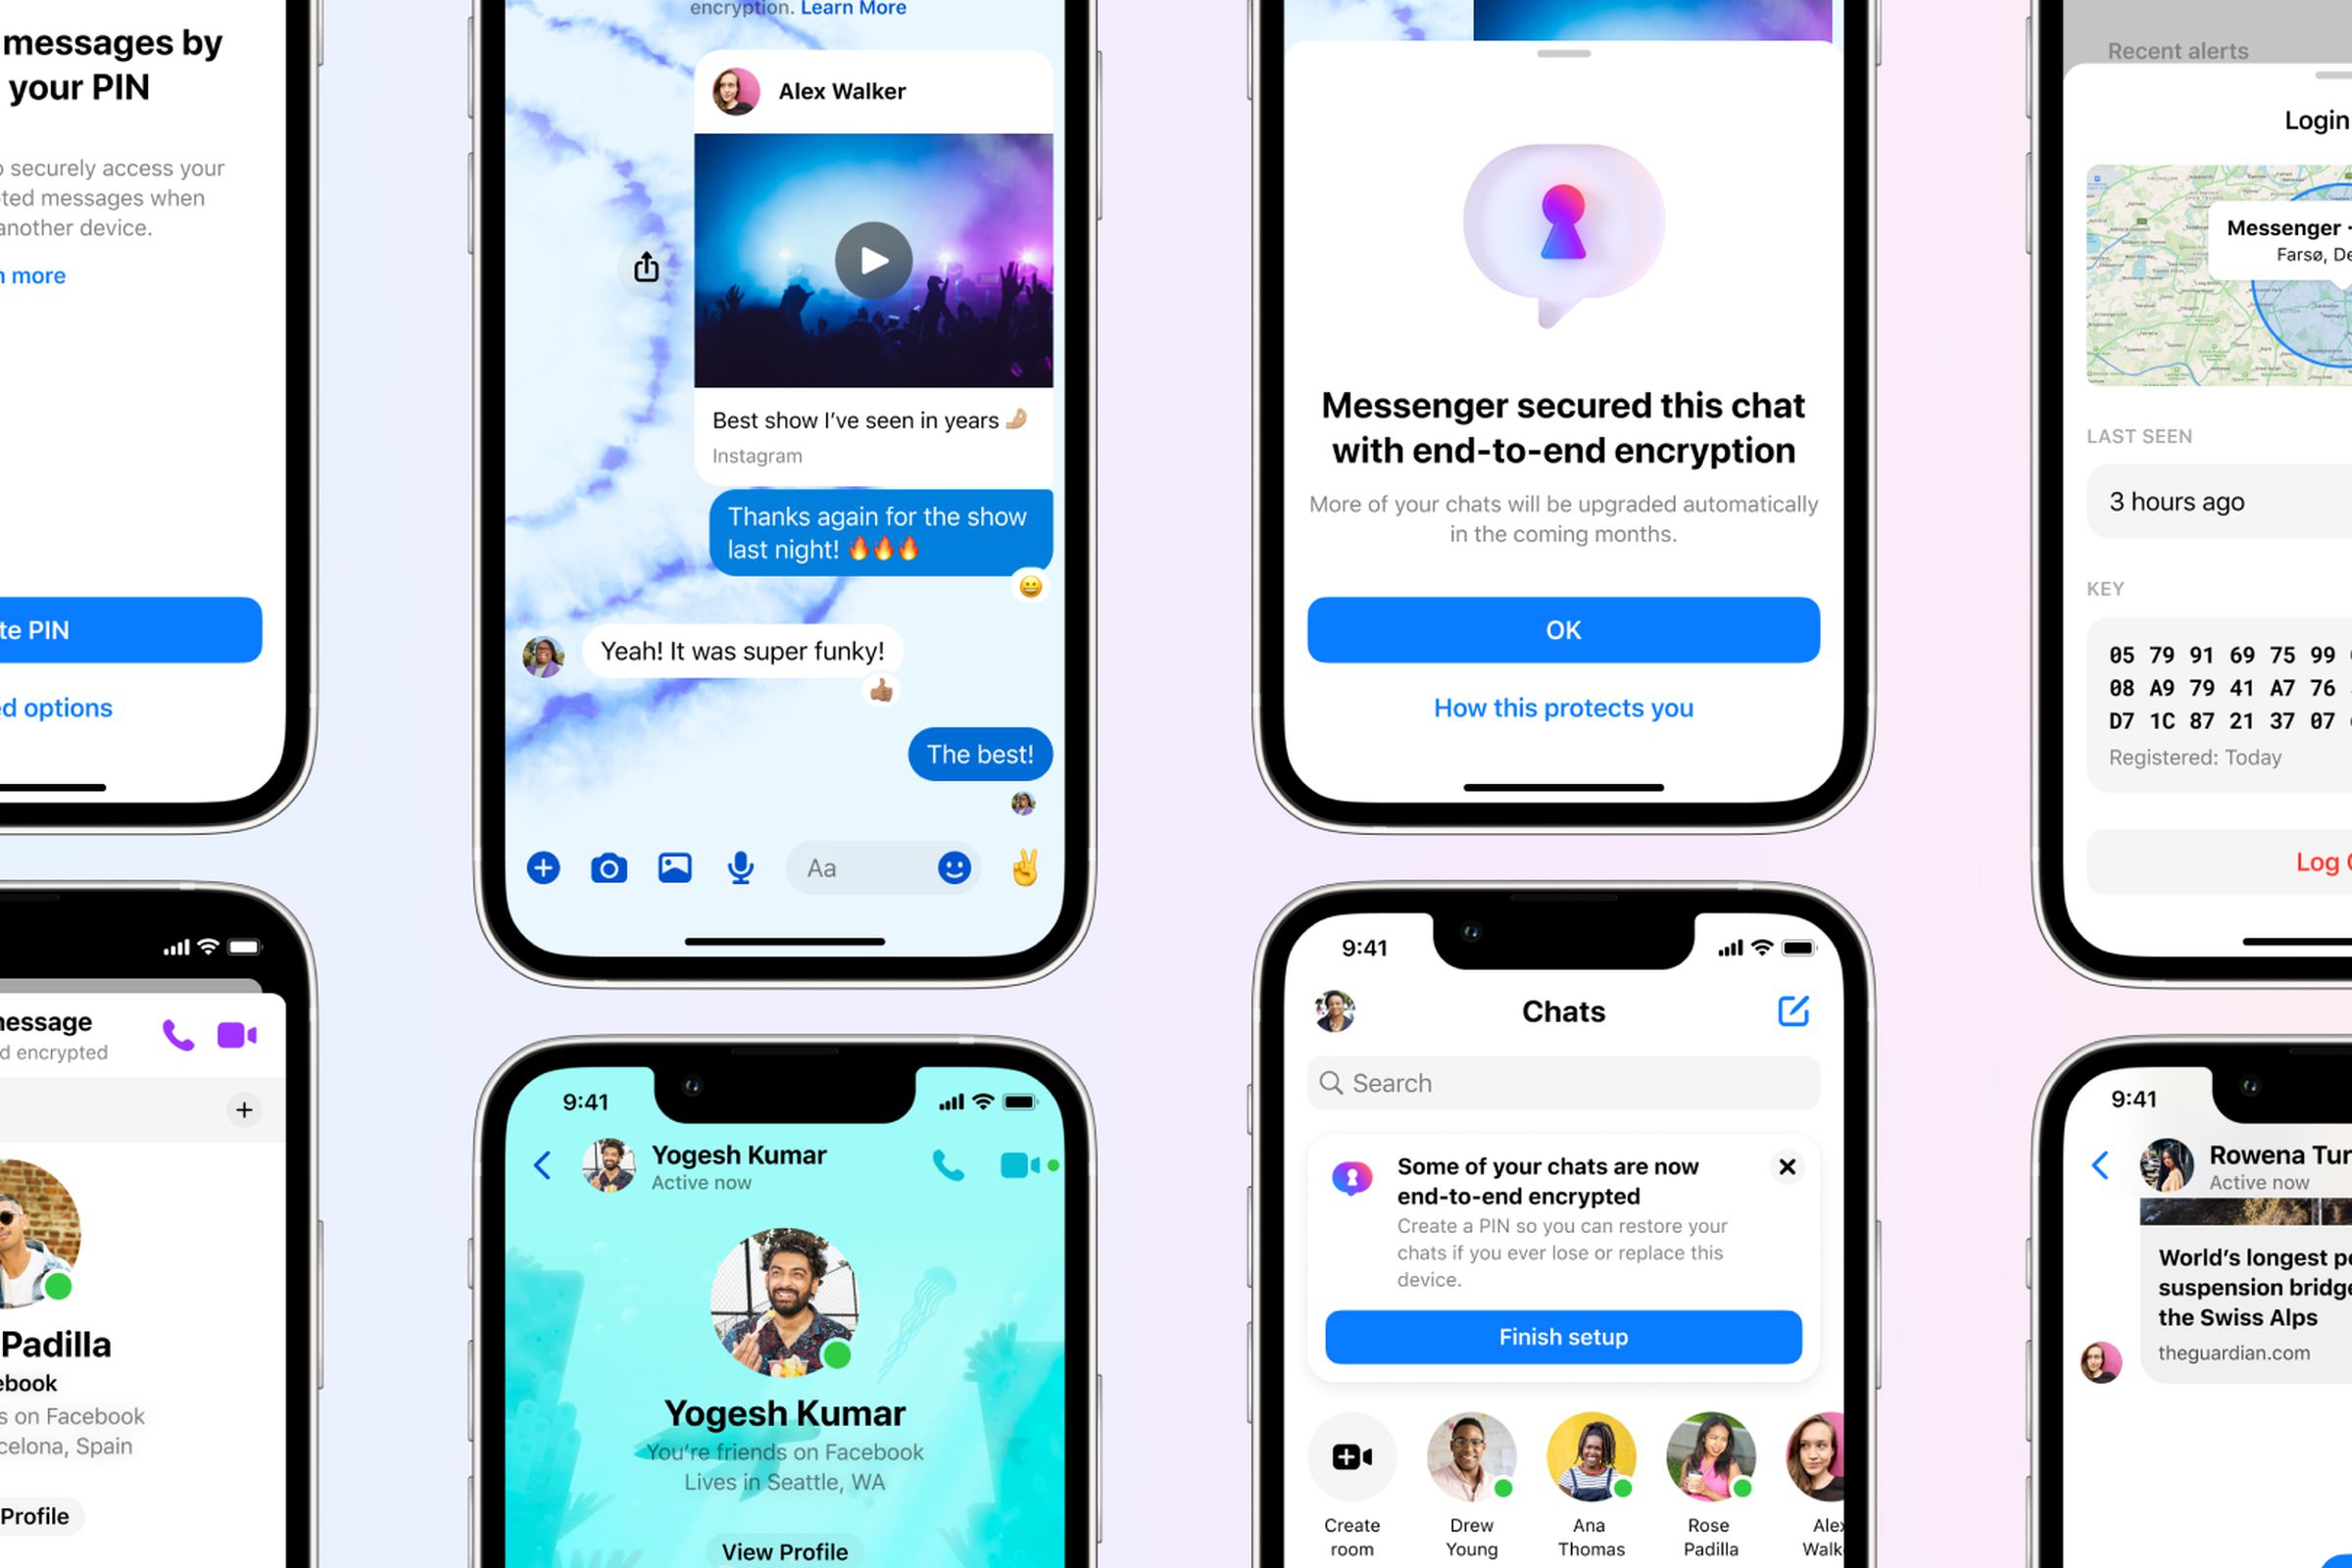 An image showing phones with Messenger